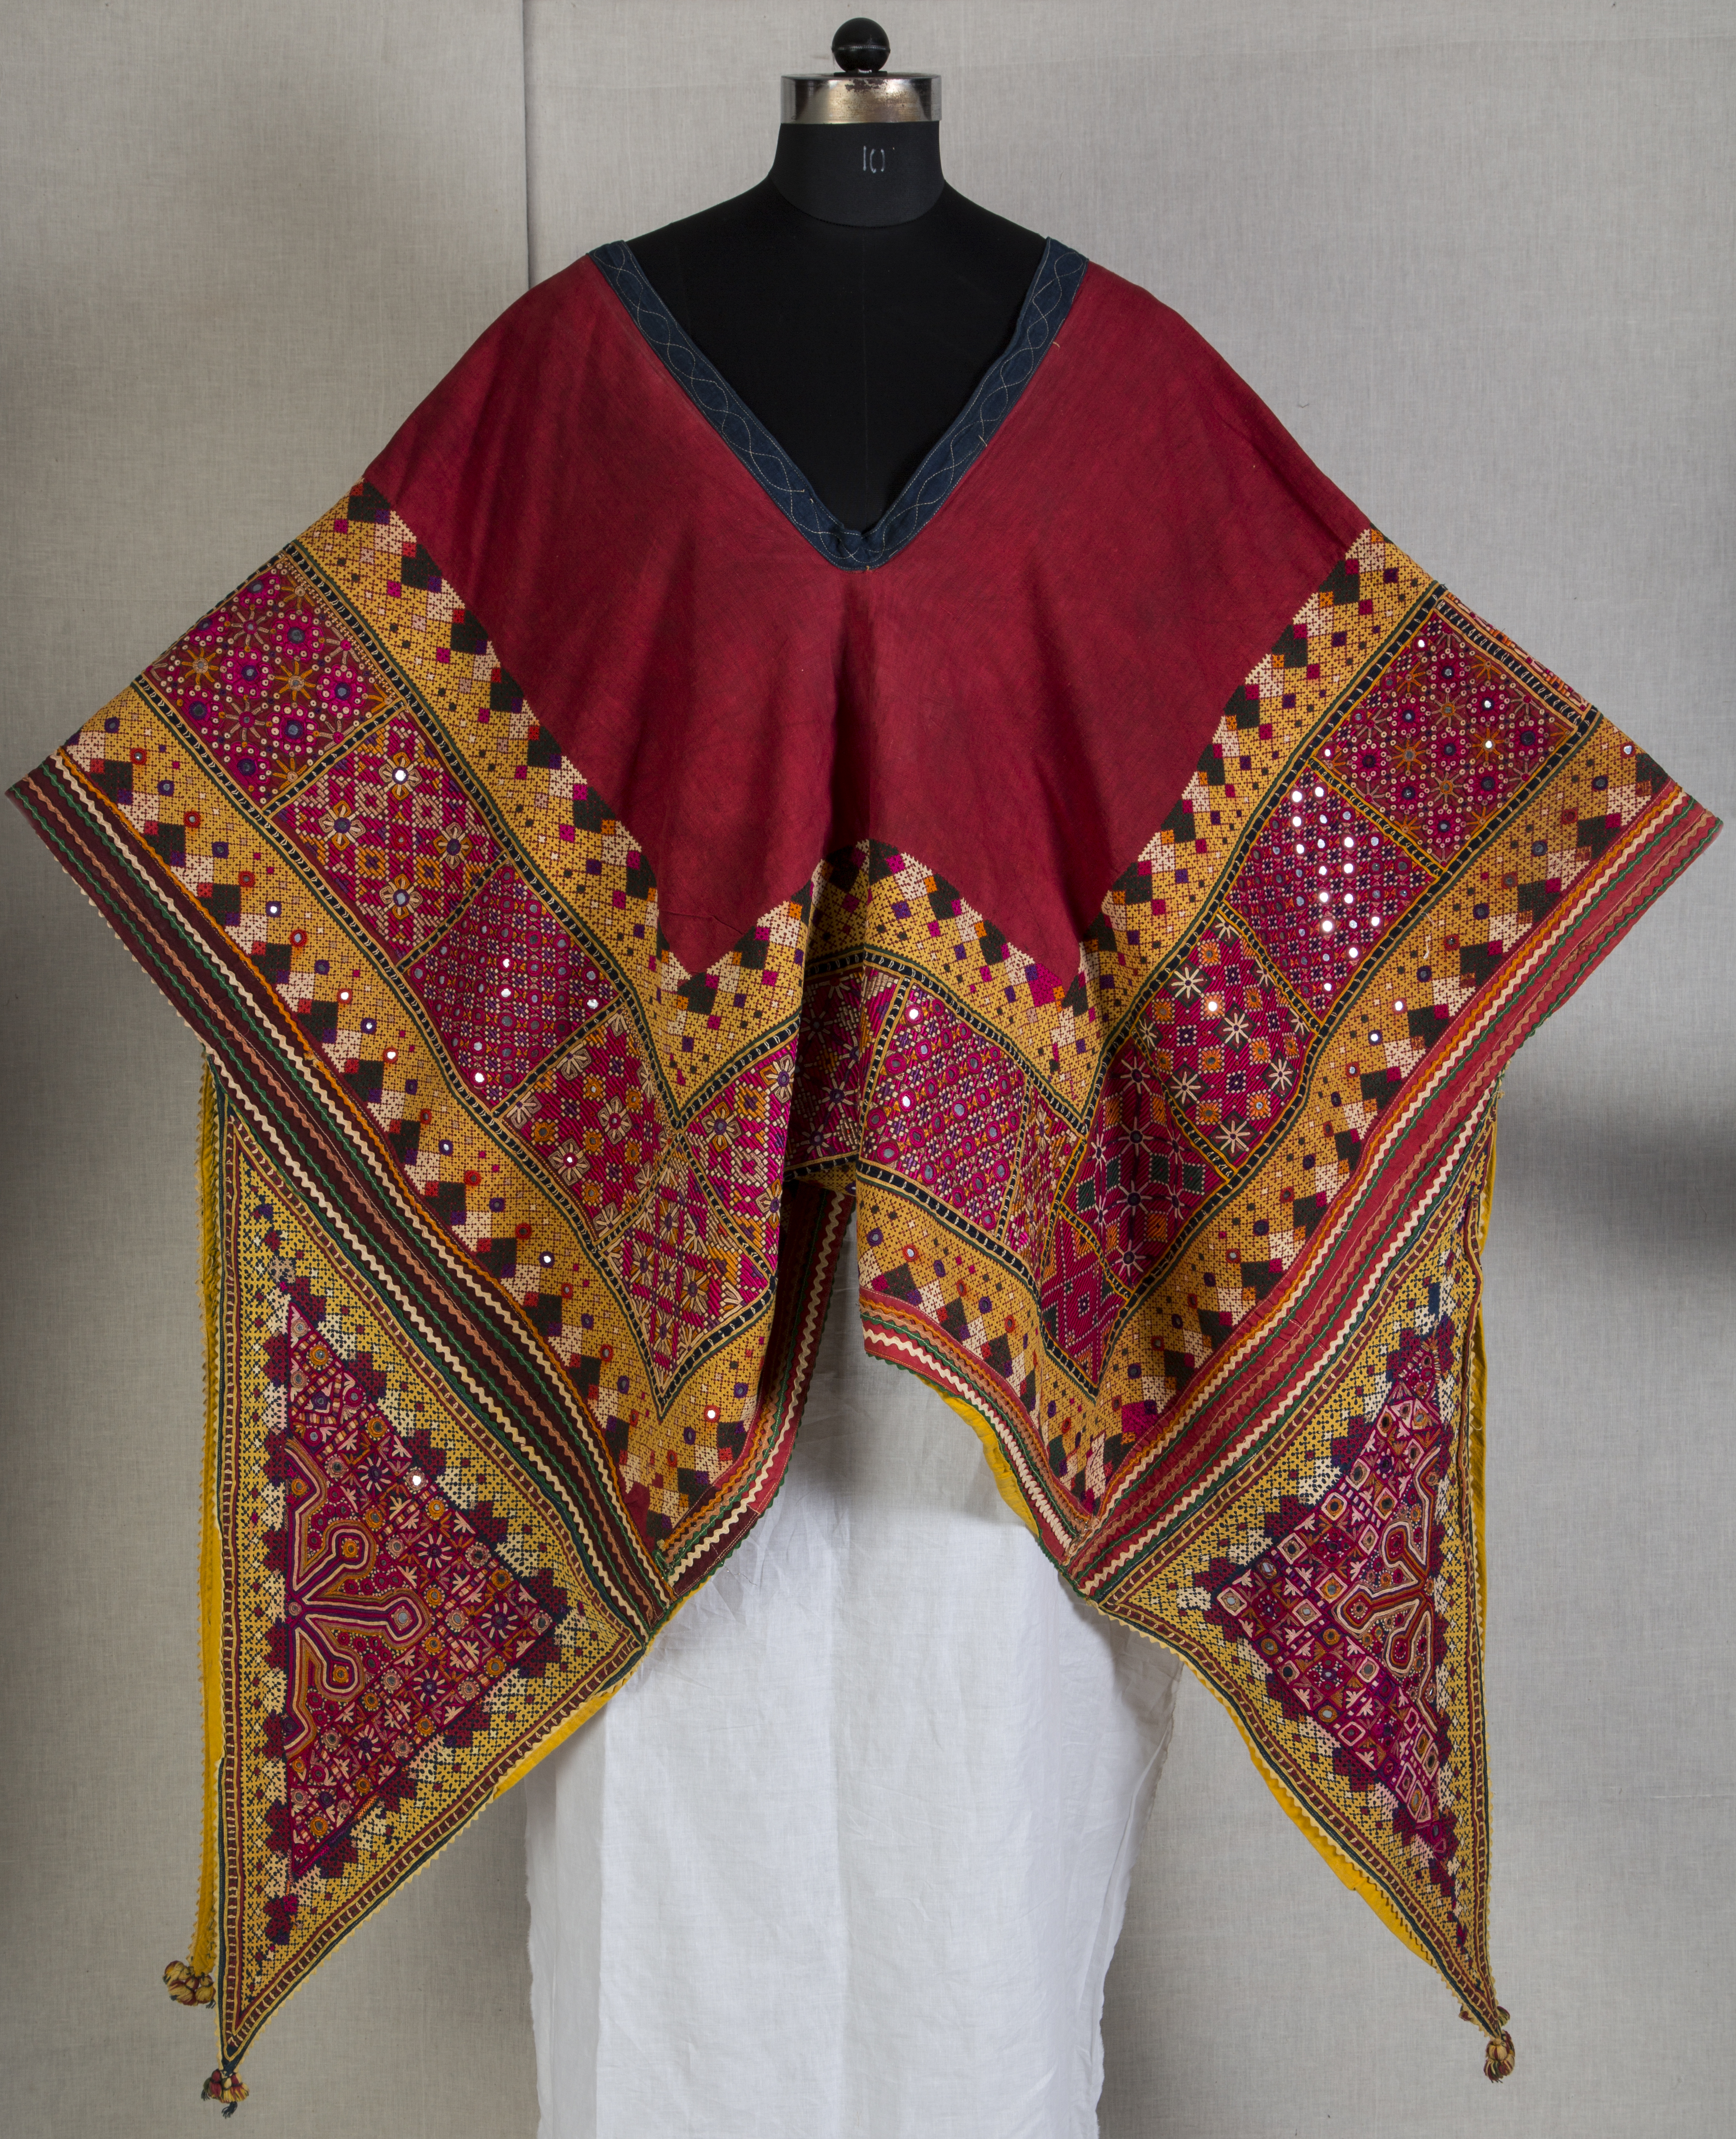 Camel cover with combination of Ari, Paoko & Baawalio Embroidery & Katab (applique).